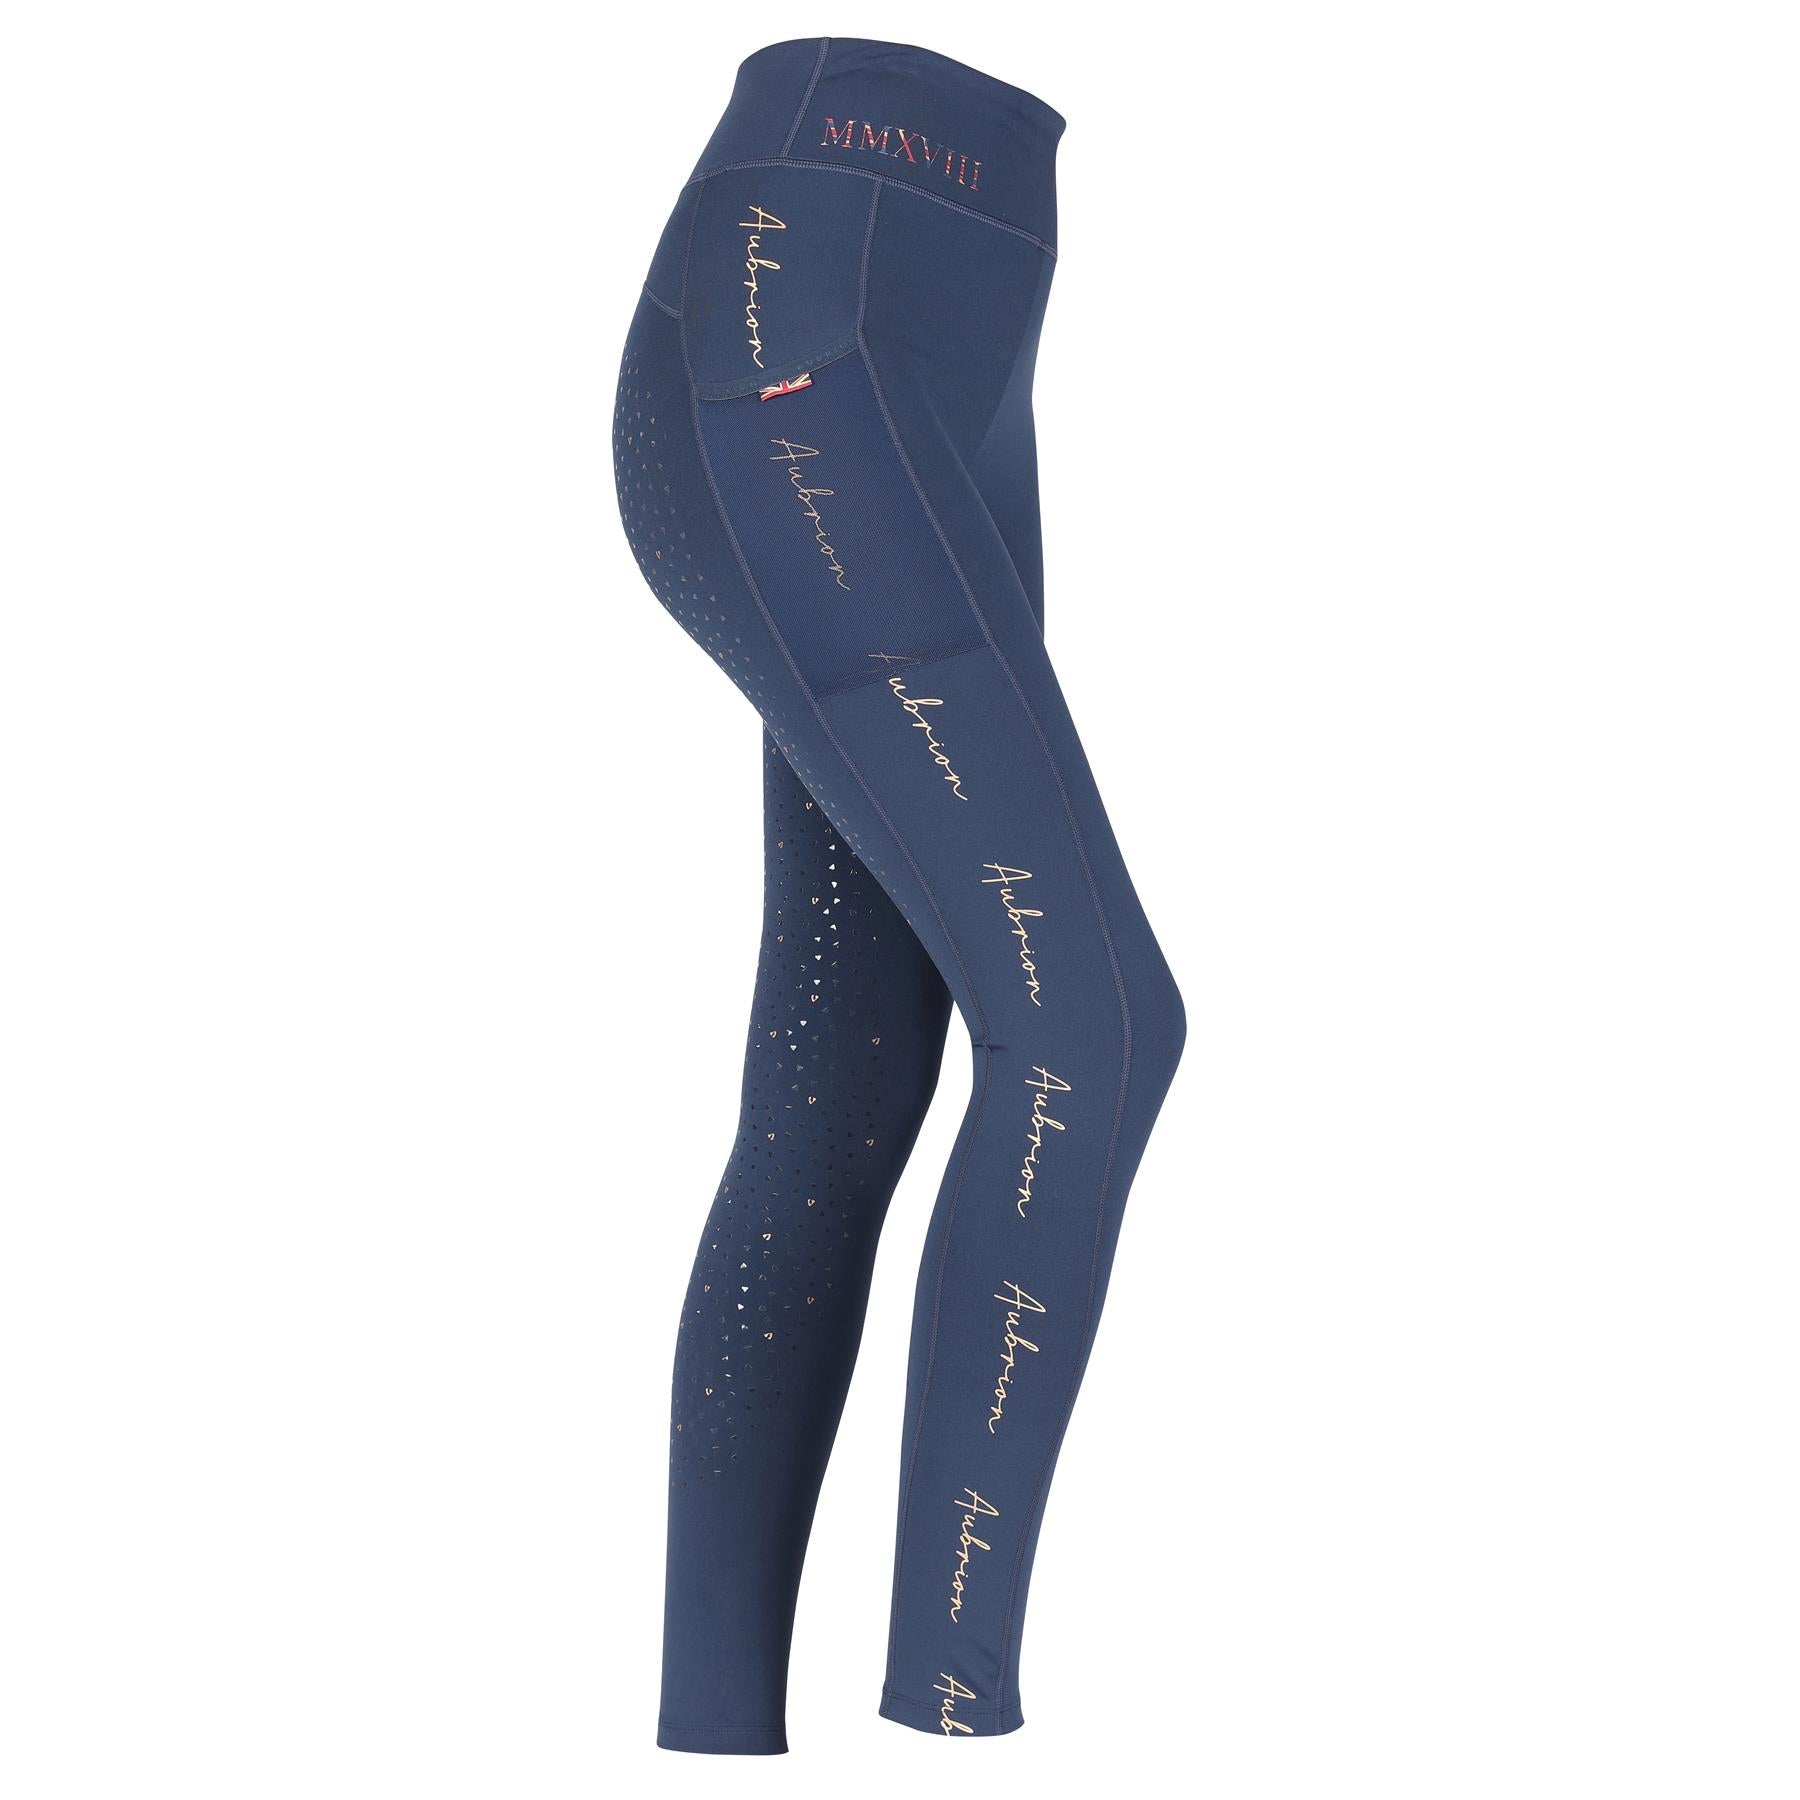 Aubrion Team Riding Tights - Young Rider - Just Horse Riders